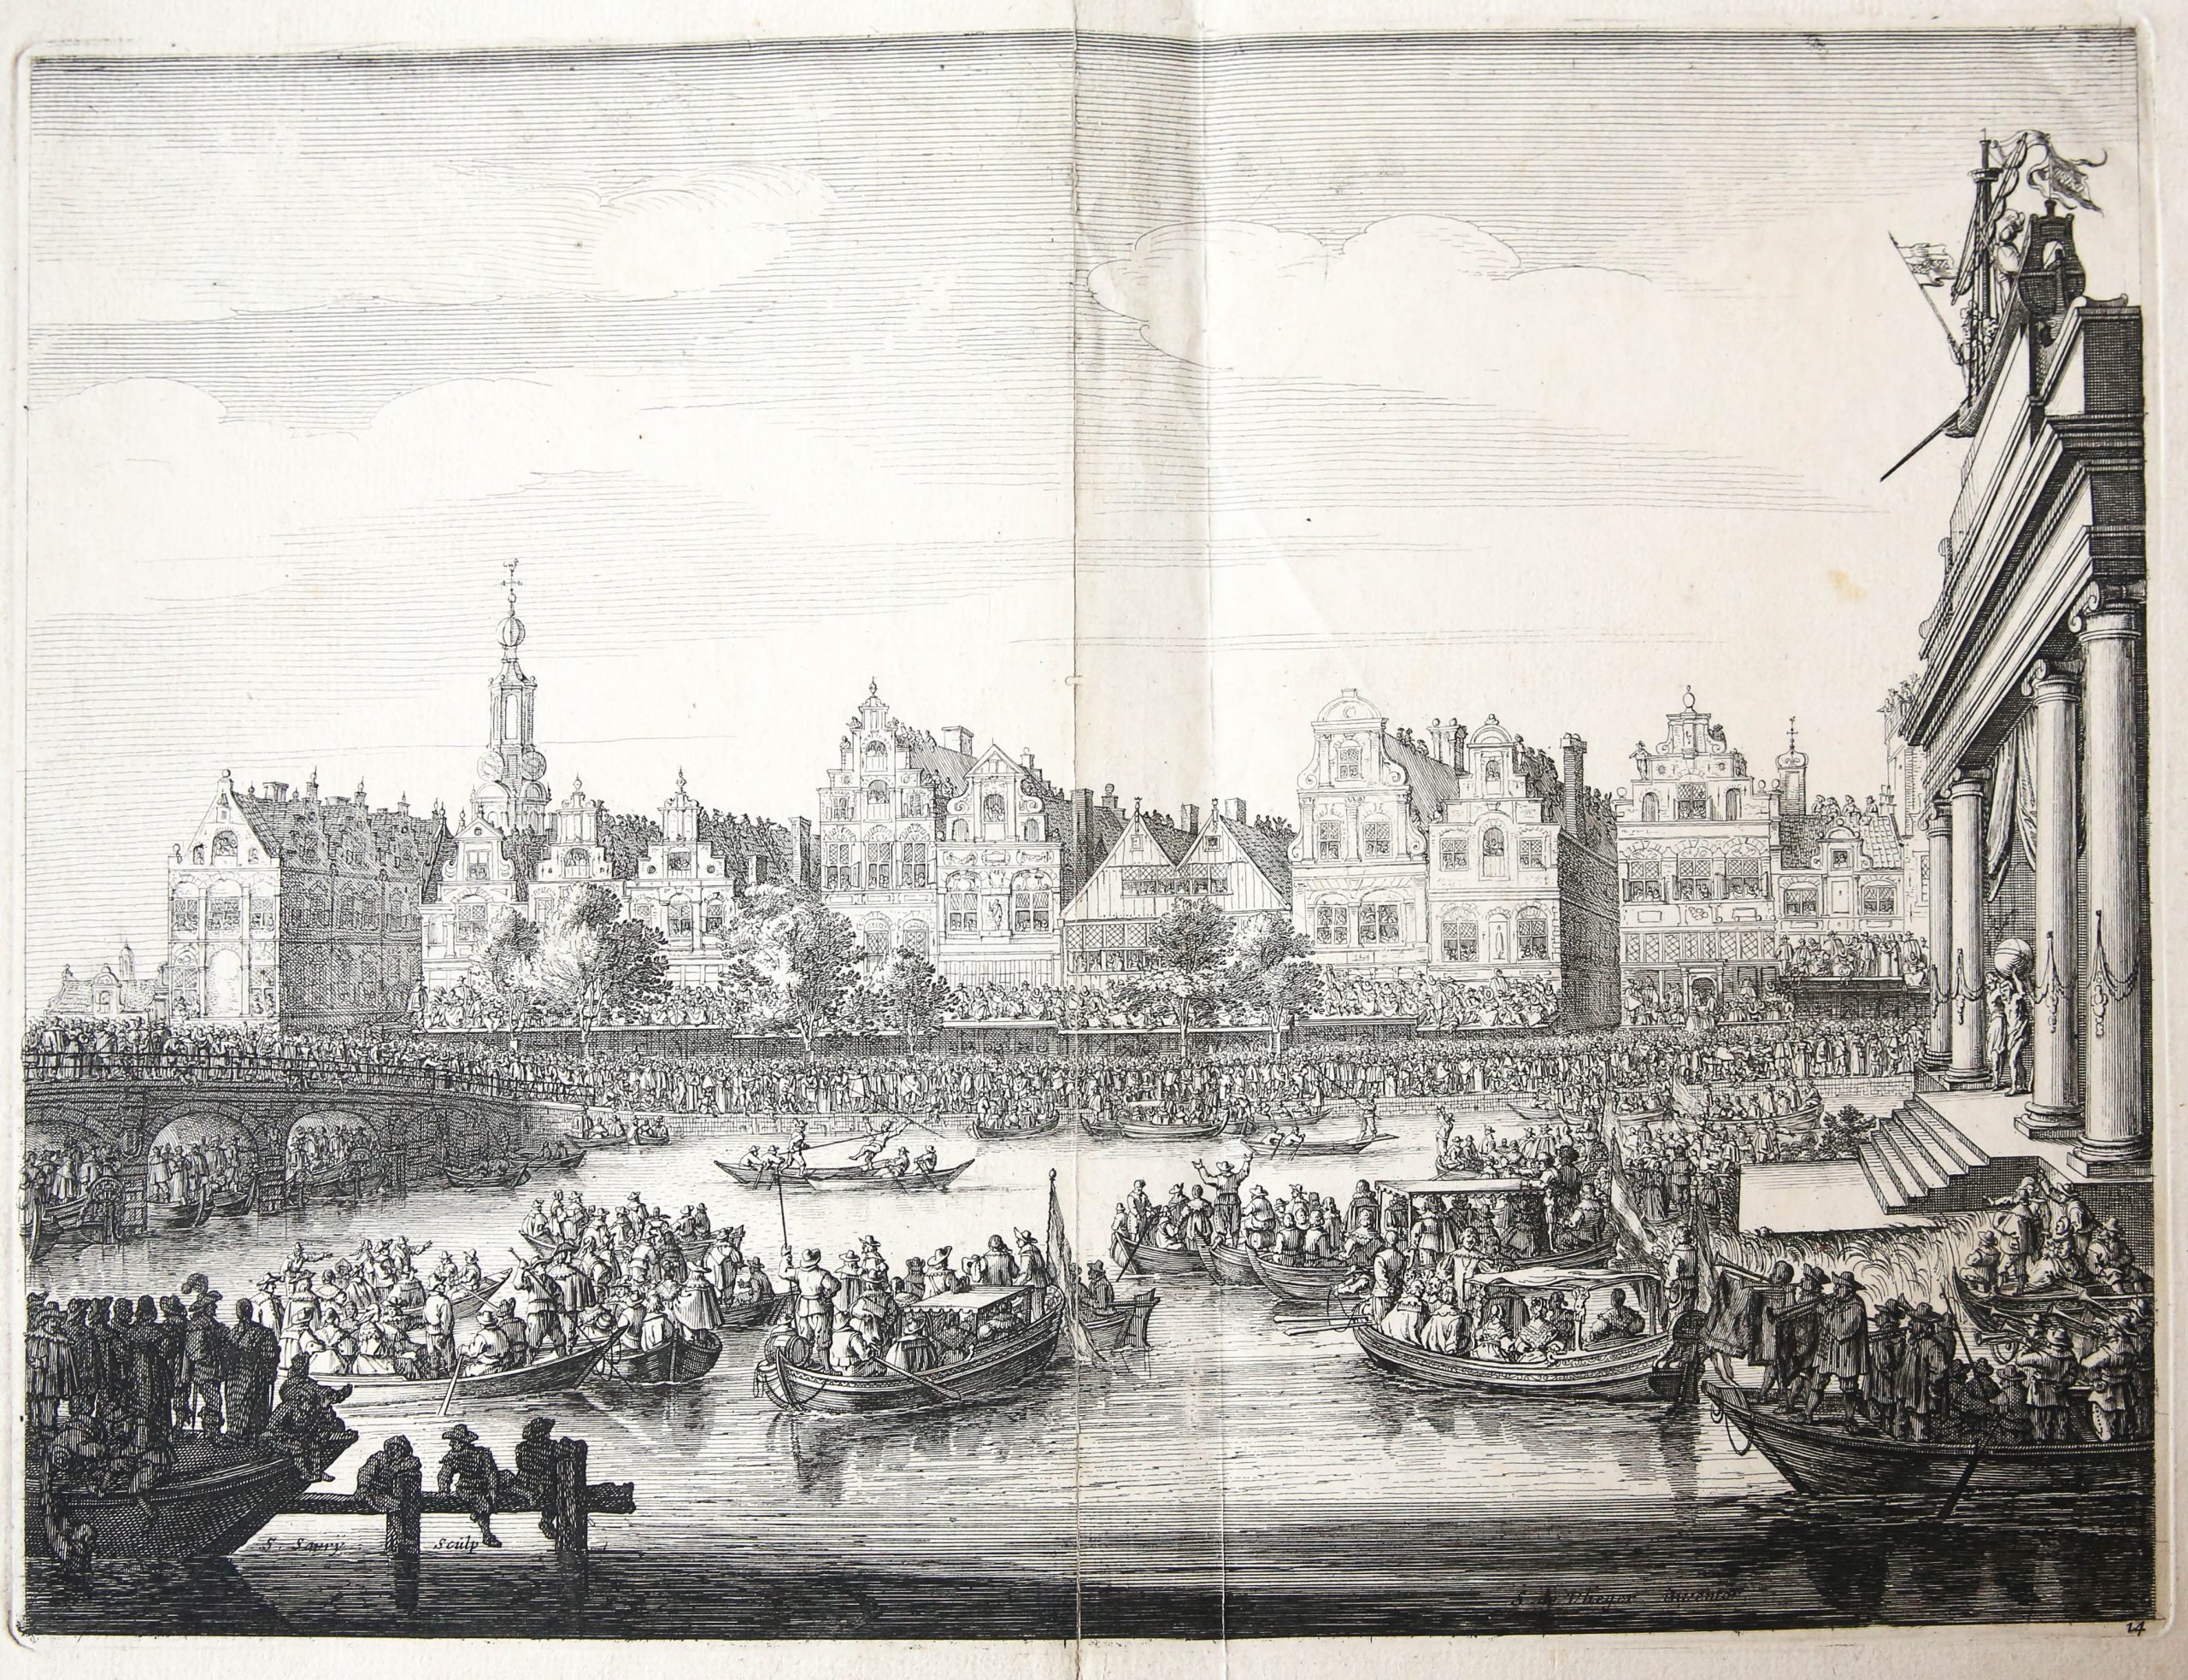 [Original etching/ets] Procession on the Rokin with theatre on island at right, during the visit of Maria de' Medici to Amsterdam, 1638.